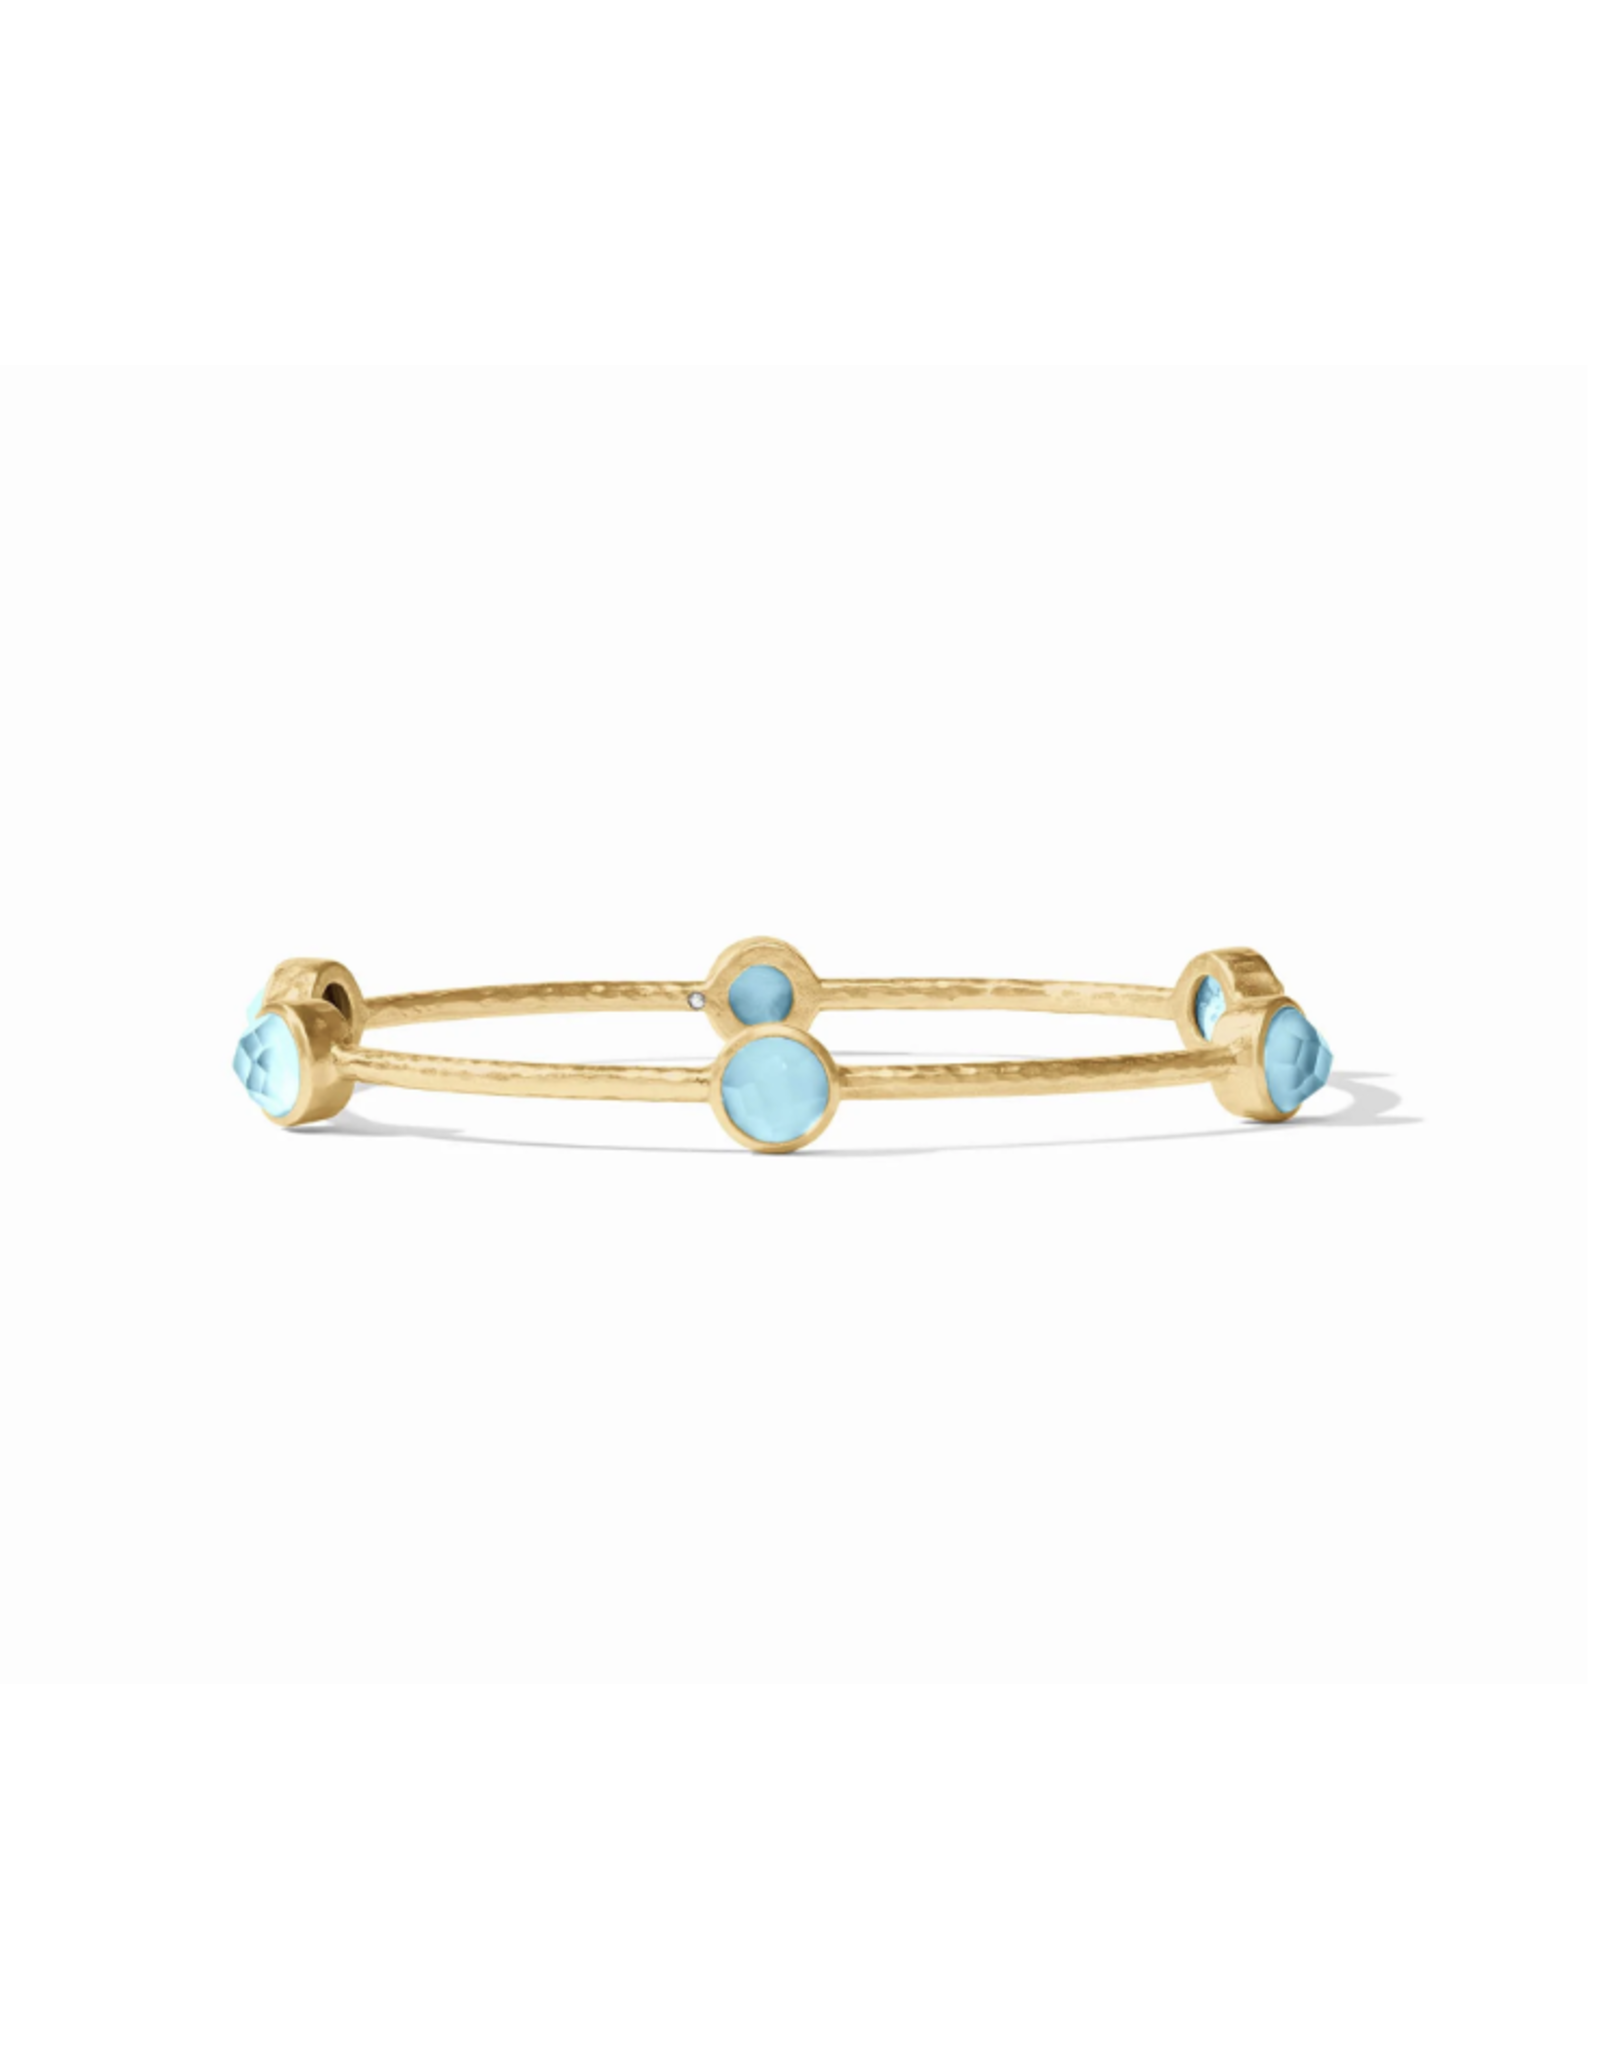 Julie Vos Milano Luxe Bangle in Iridescent Capri Blue by Julie Vos